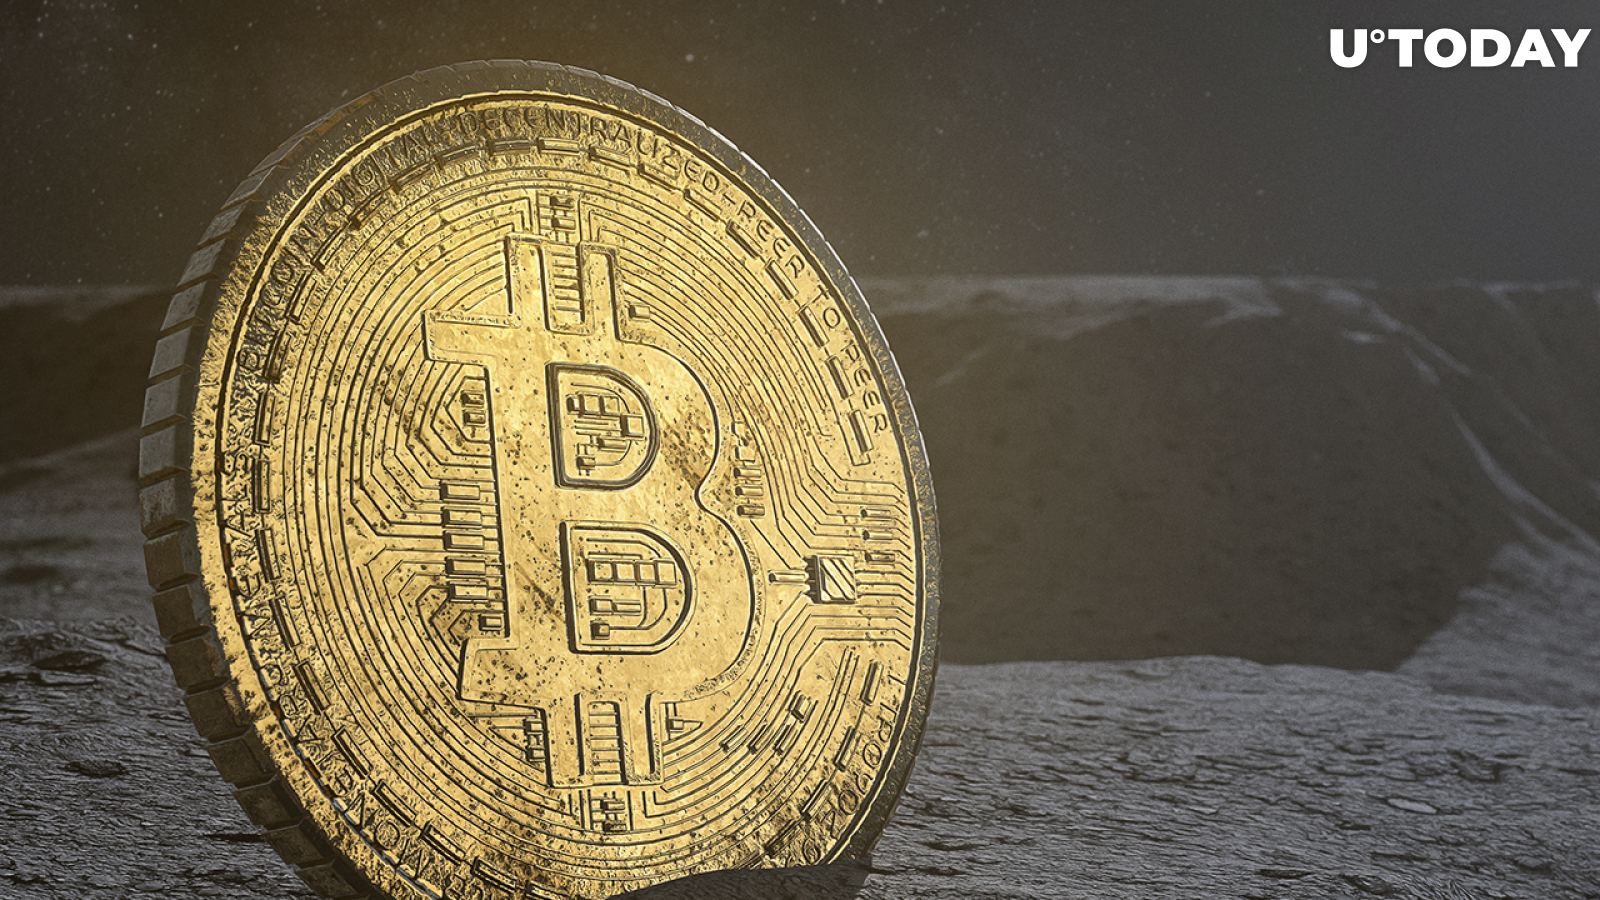 Ancient Bitcoin Wallets on Rise and May Cause Price Spike: Report